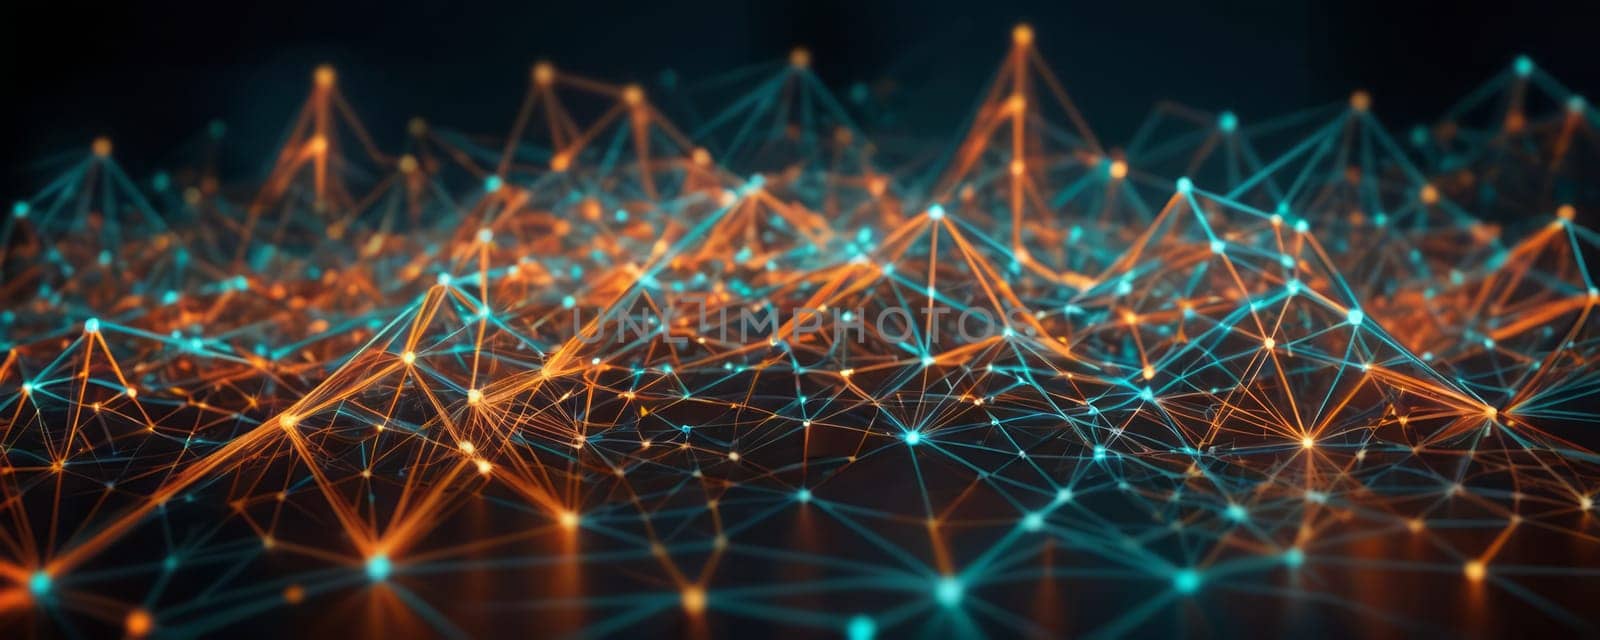 The image presents an intricate network of interconnected lines and dots, glowing in shades of blue and orange against a dark background. The intersection points emit light, enhancing the design and complexity of the network. The image conveys a technological and futuristic mood, suggesting themes of advanced computing or artificial intelligence. Generative AI